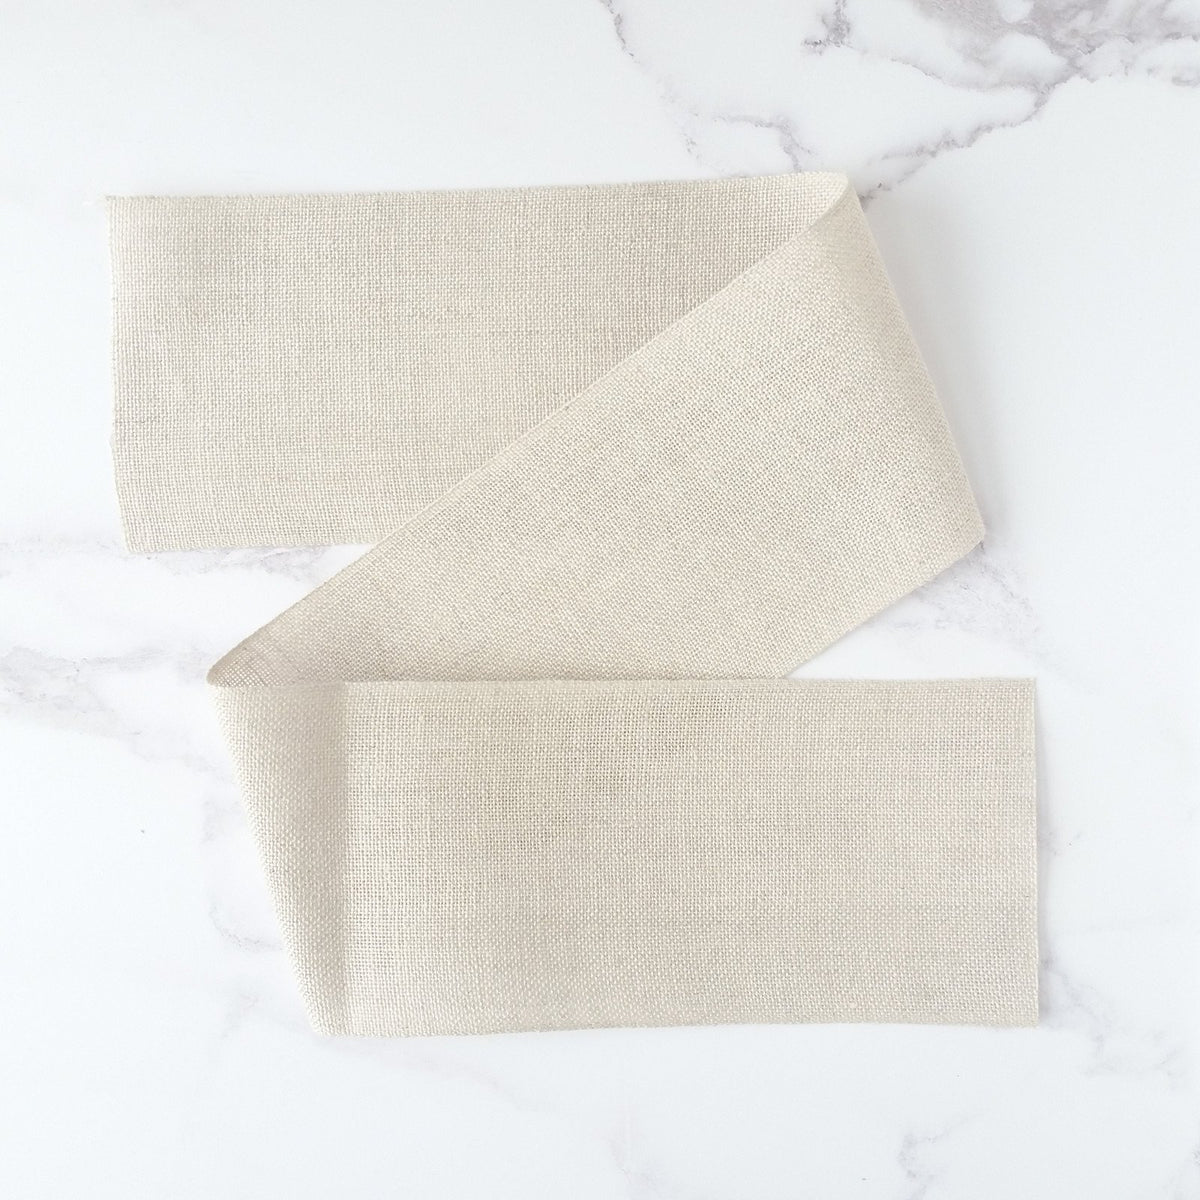 Natural Linen Stitching Band - 3.5 inches